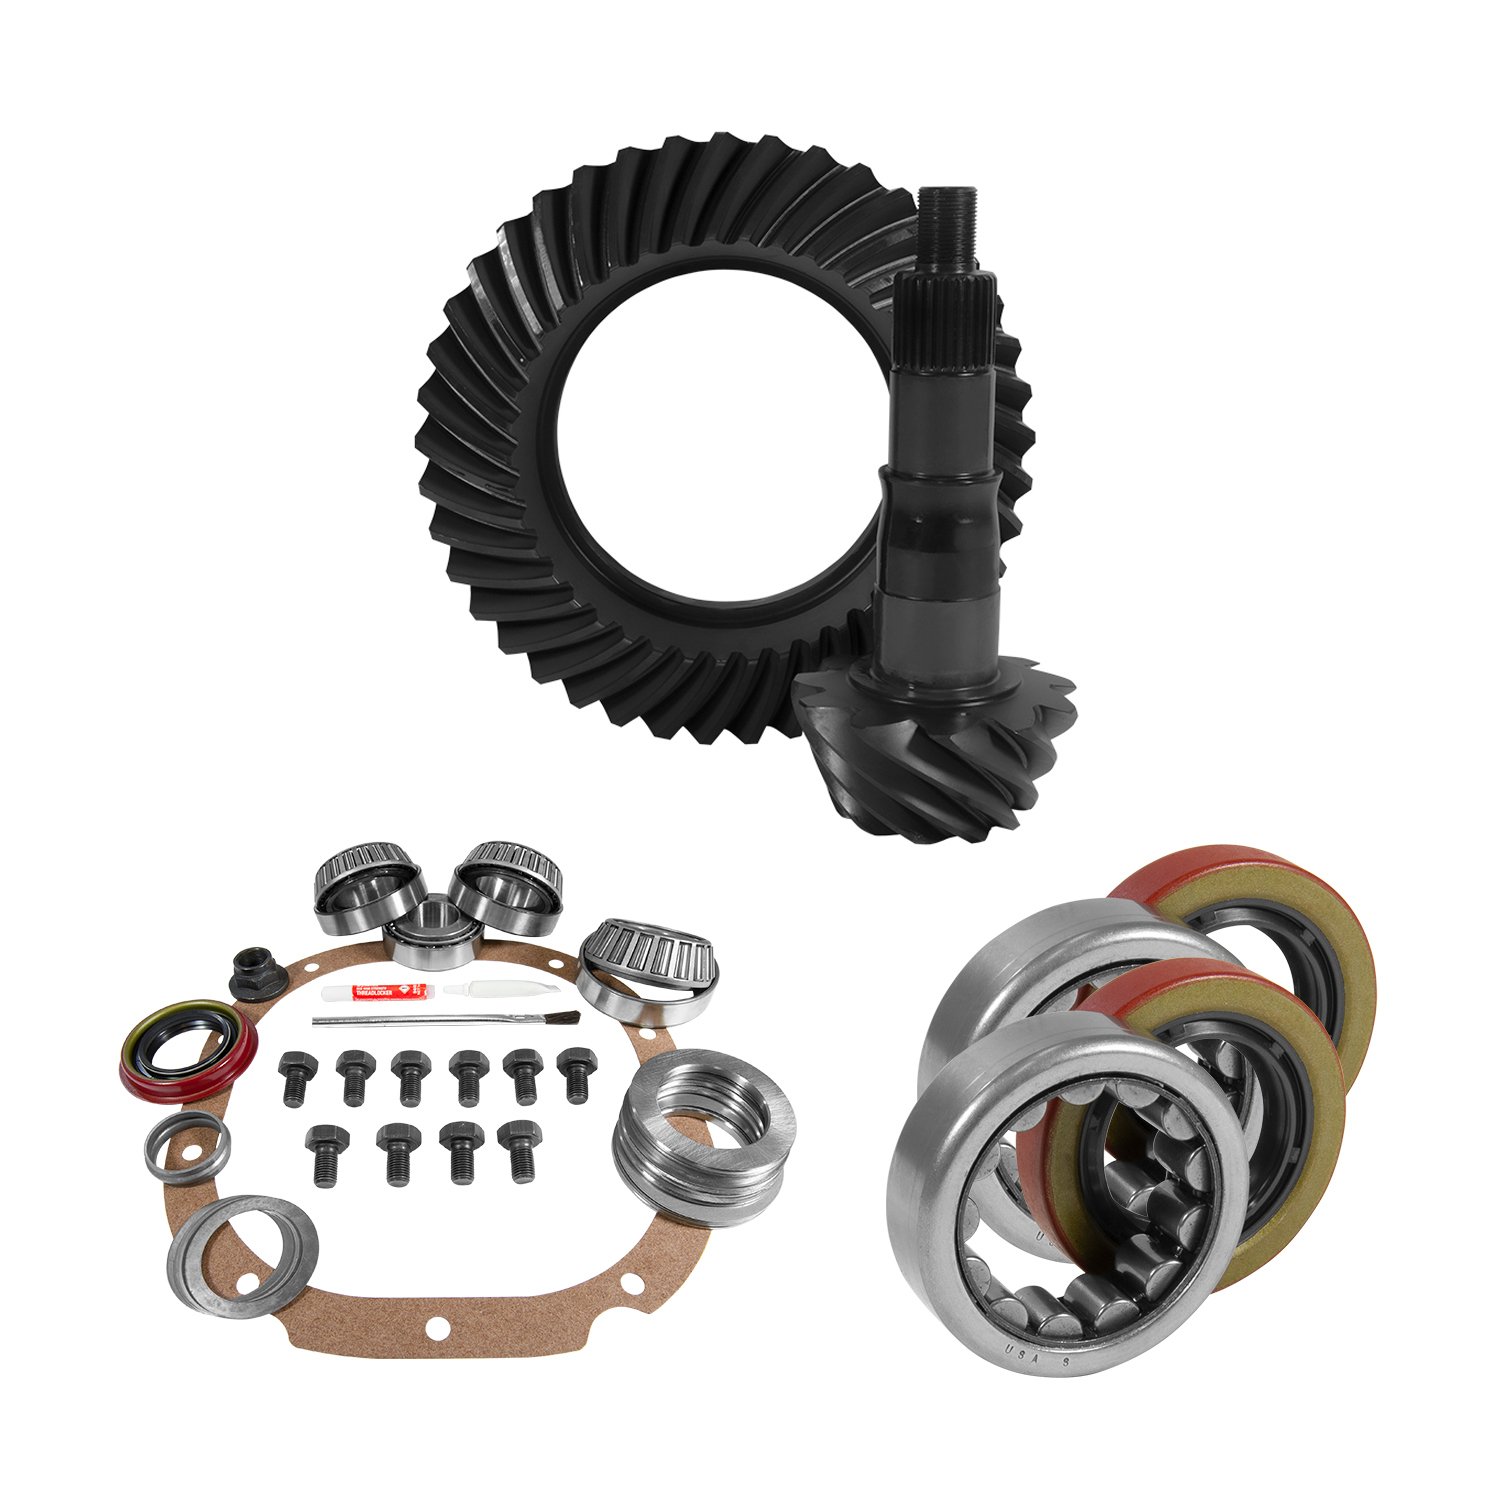 USA Standard 10674 8.8 in. Ford 4.11 Rear Ring & Pinion Install Kit, 2.25 in. Od Axle Bearings & Seals